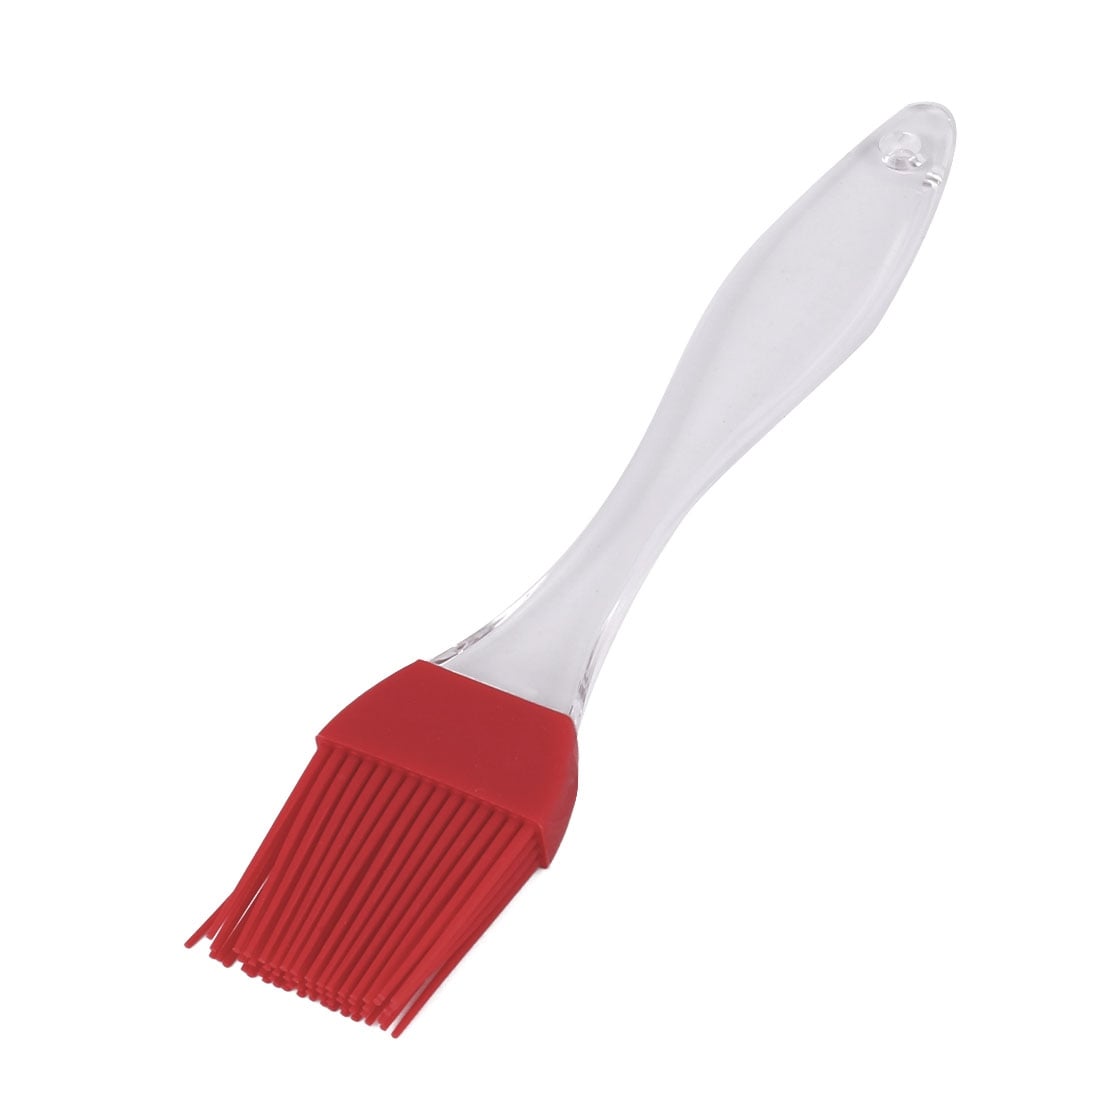 https://ak1.ostkcdn.com/images/products/is/images/direct/e8bba82ad66b0097a09de5210cd029d50f36372a/Barbecue-Silicone-Head-Heat-Resistant-Oil-Condiment-Pastry-Brush.jpg